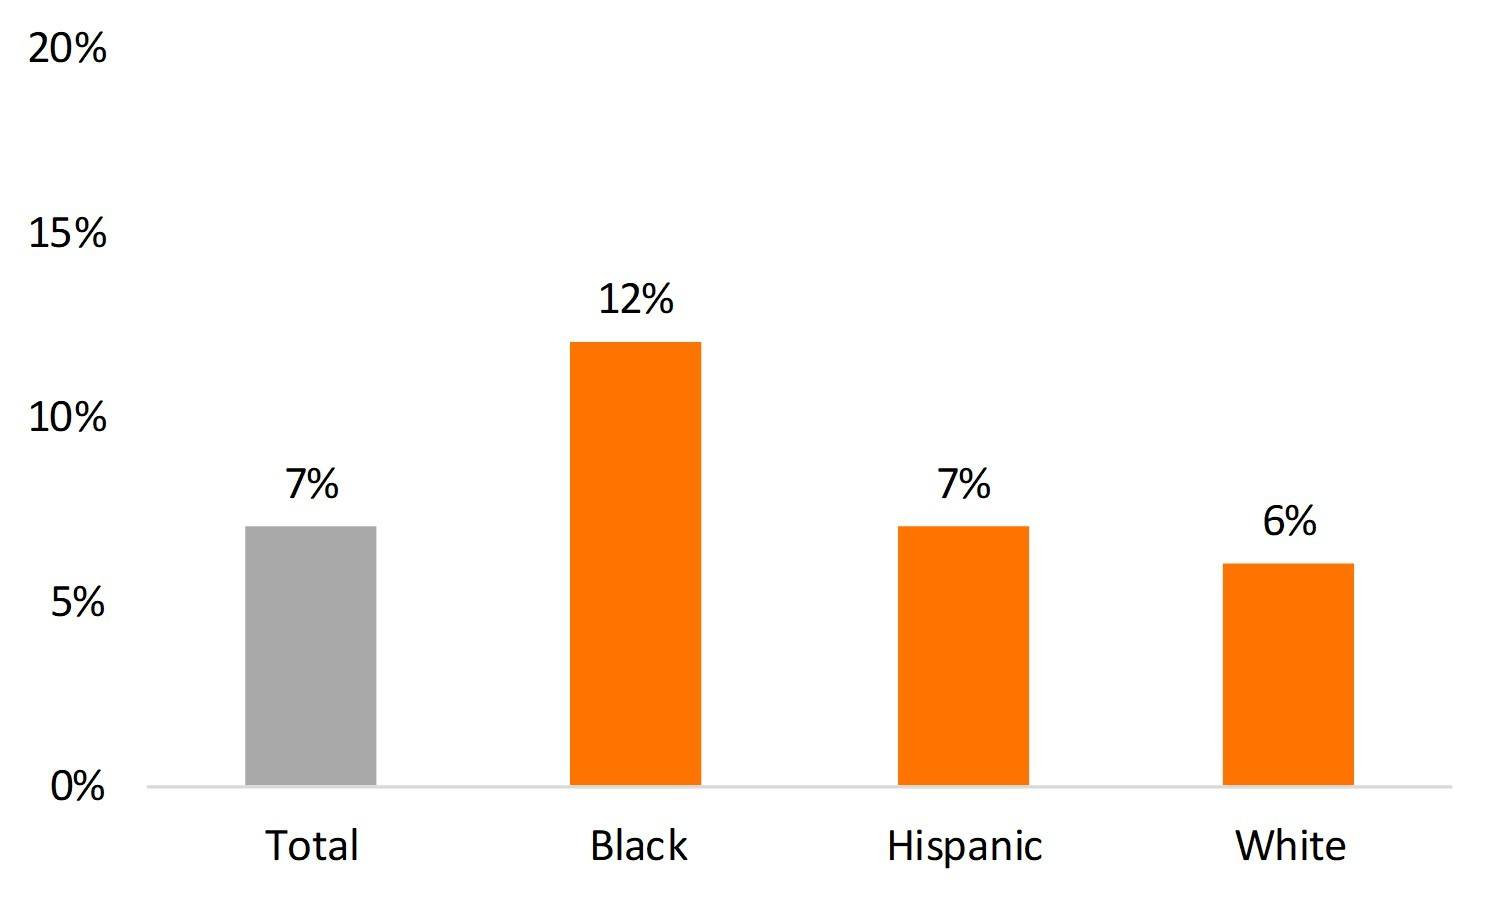 bar graph w/total of 7% in gray and race-ethnicity in orange